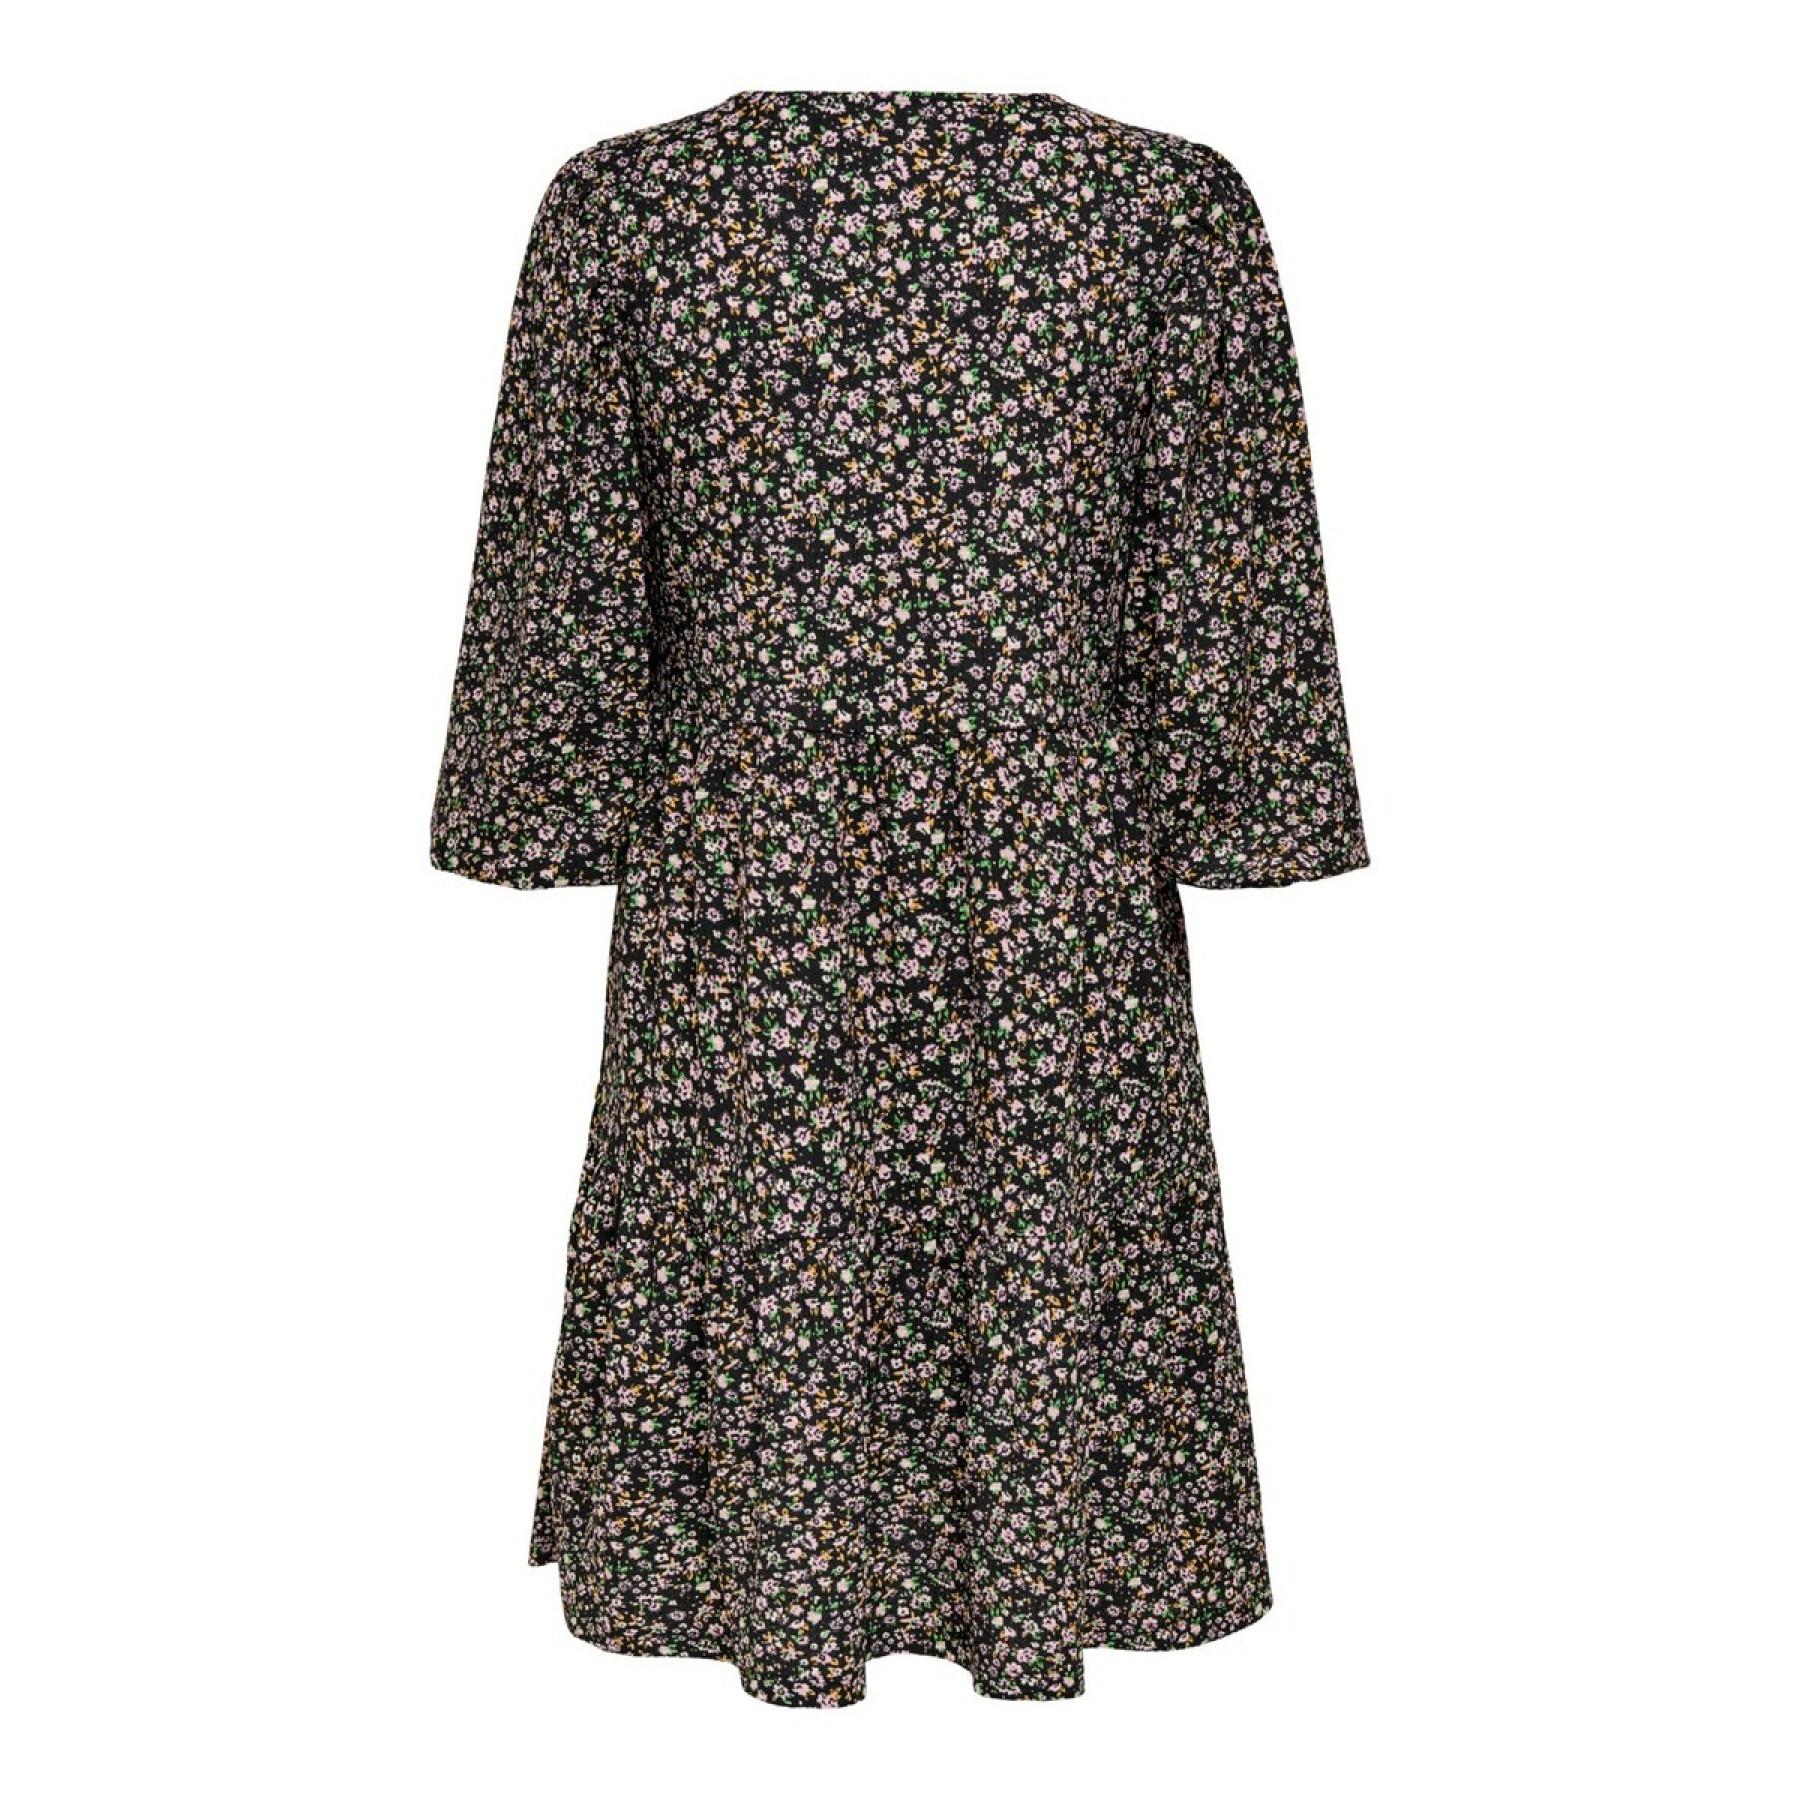 Robe femme Only Zille naya manches 3/4